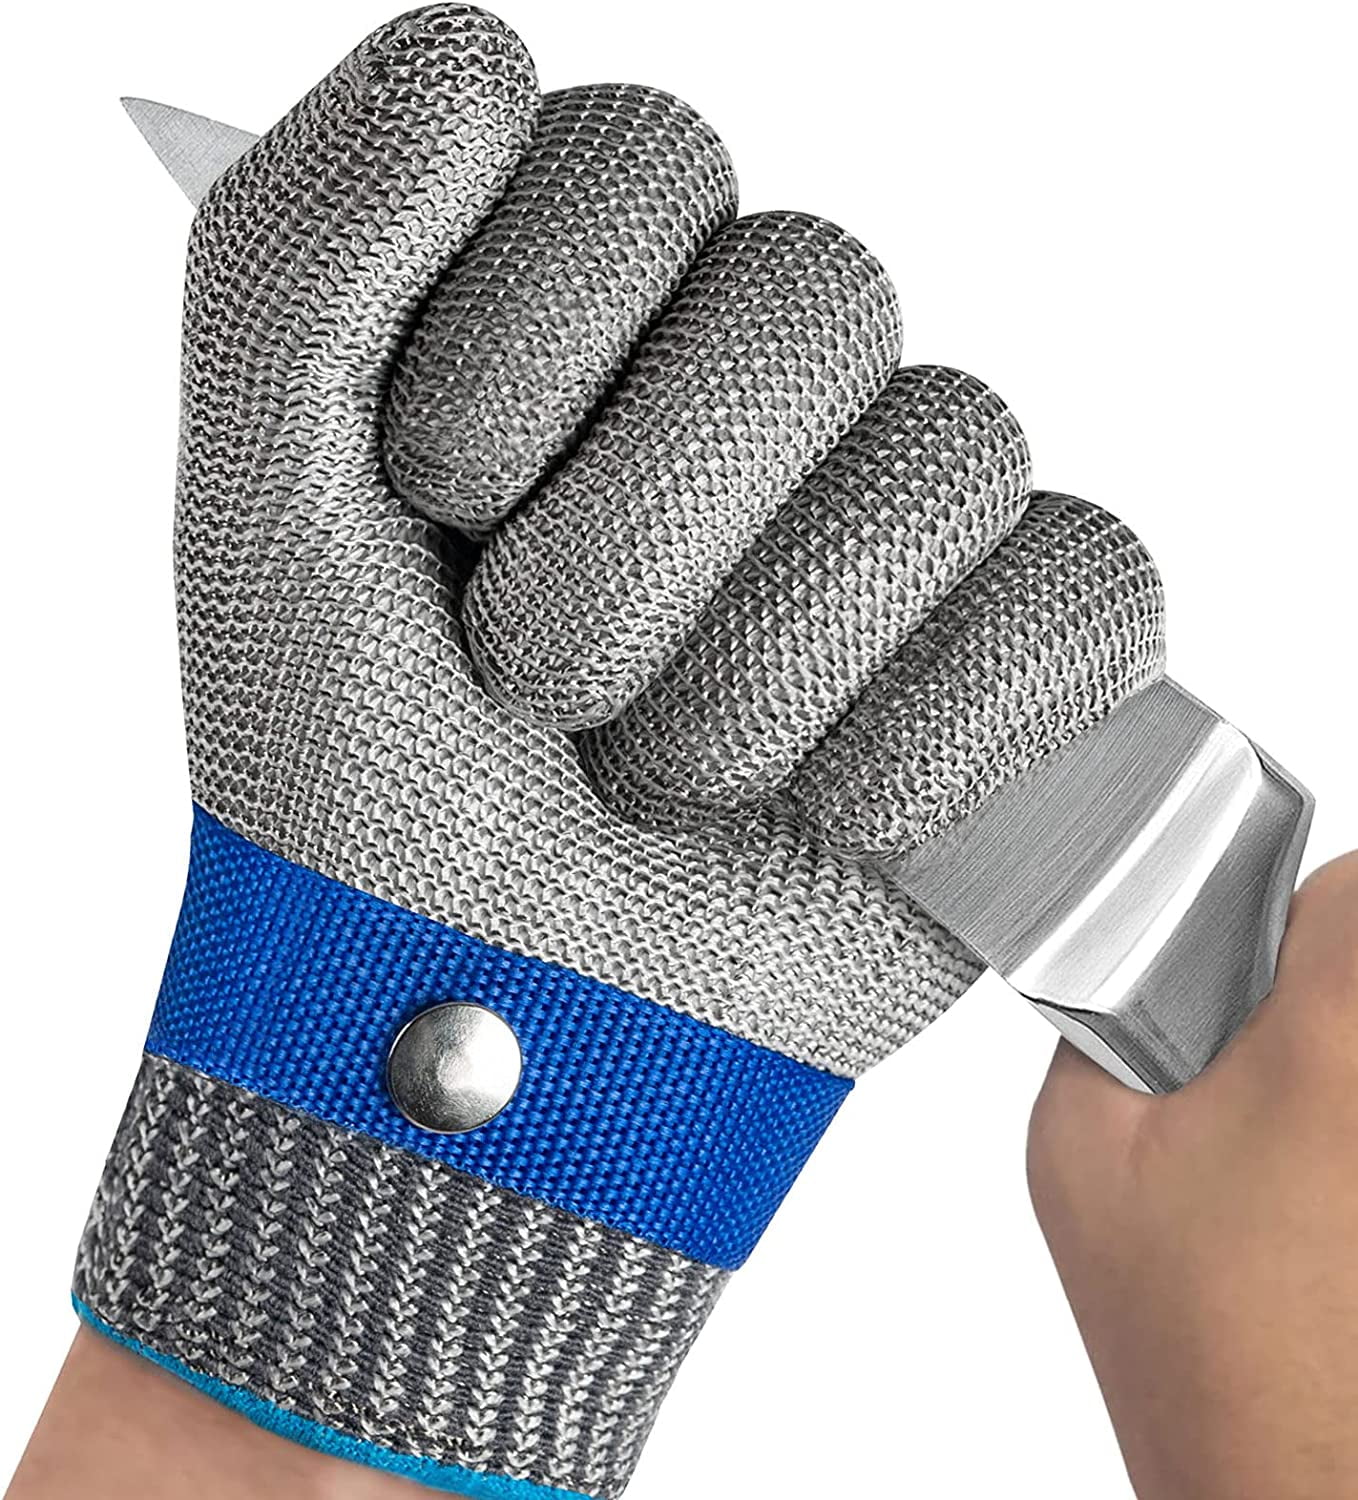 JDL Cut Resistant Gloves with Touch Screen, 3D-Comfort Stretch Fit, Firm  Grip, Suitable For Oyster Shucking, Mandoline Slicing, Meat Cutting,  Kitchen